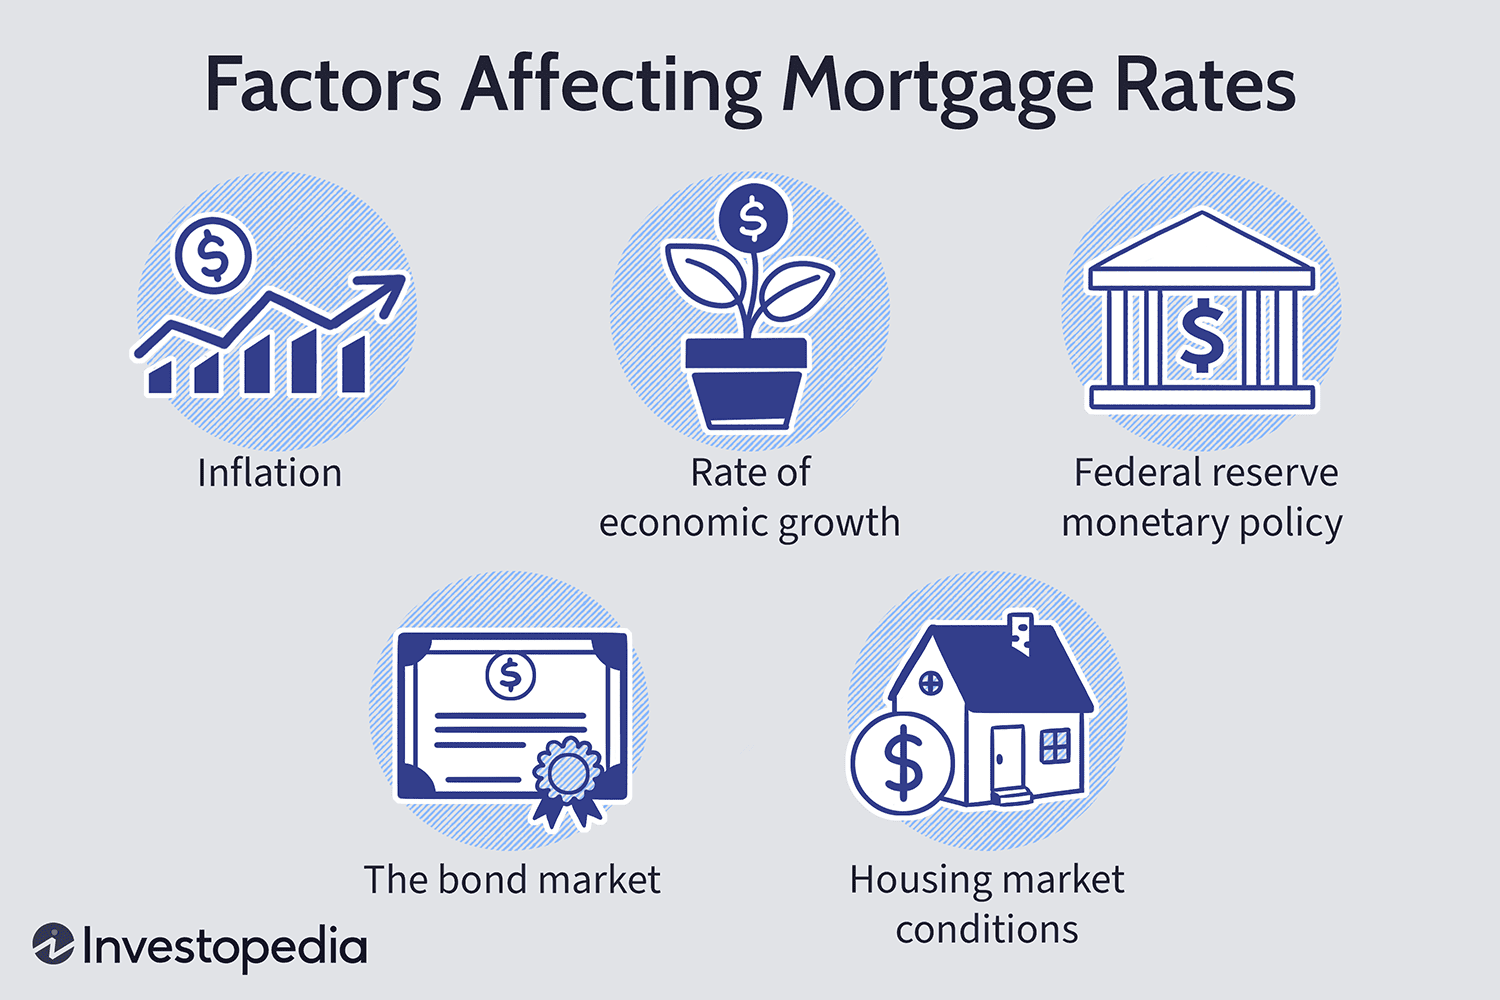 Factors affecting mortgage rates